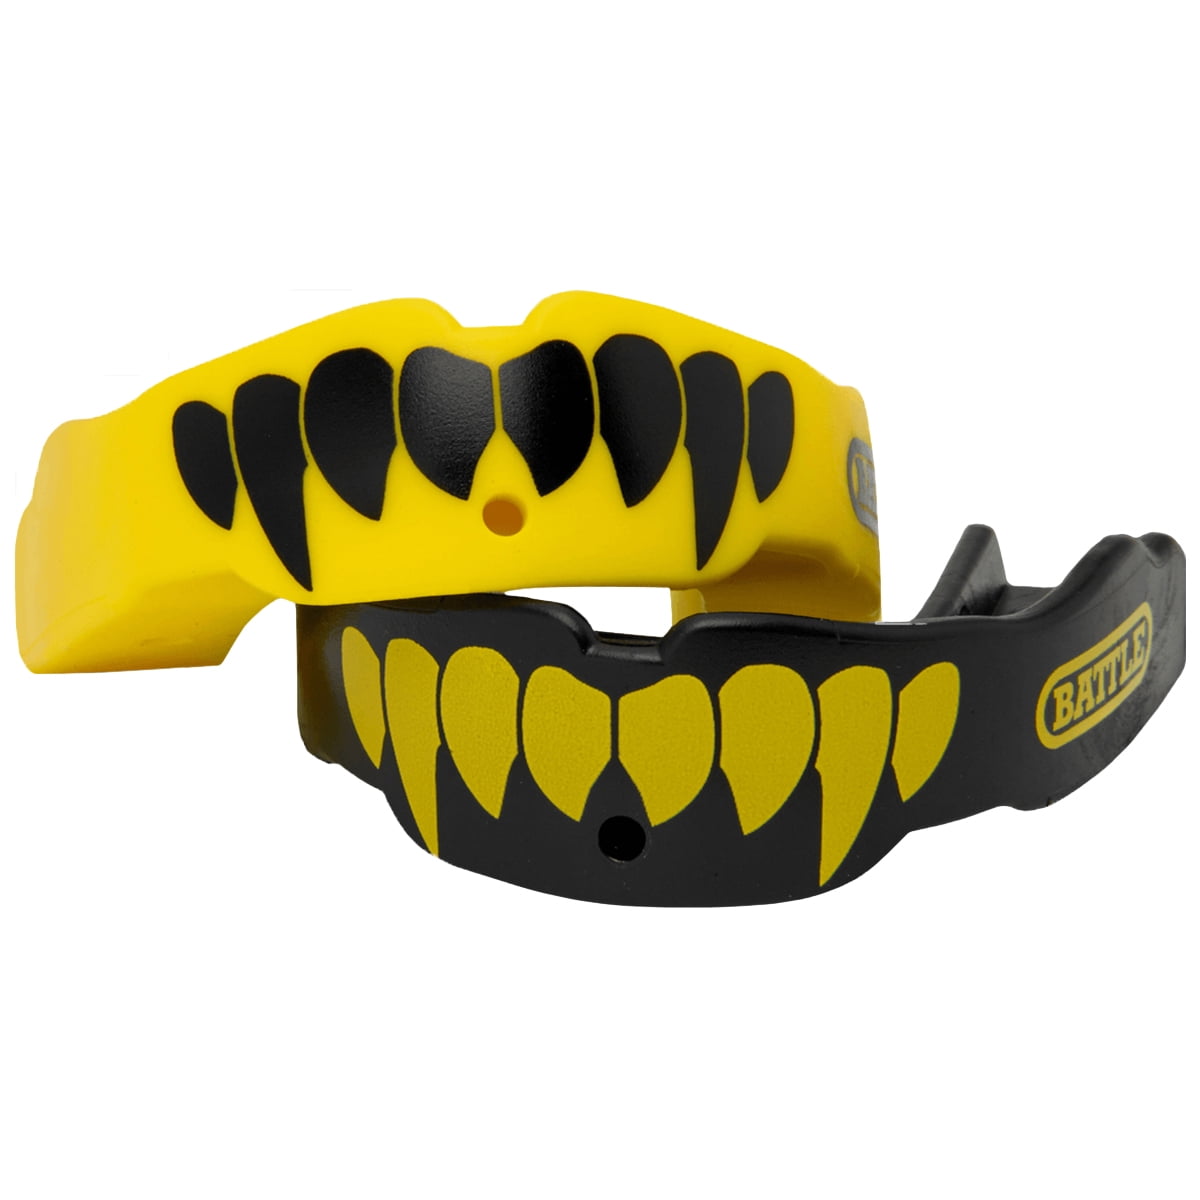 Battle Fang-Edition Mouth Guard Age ... Free Shipping 2-Pack Gold/Black Adult 